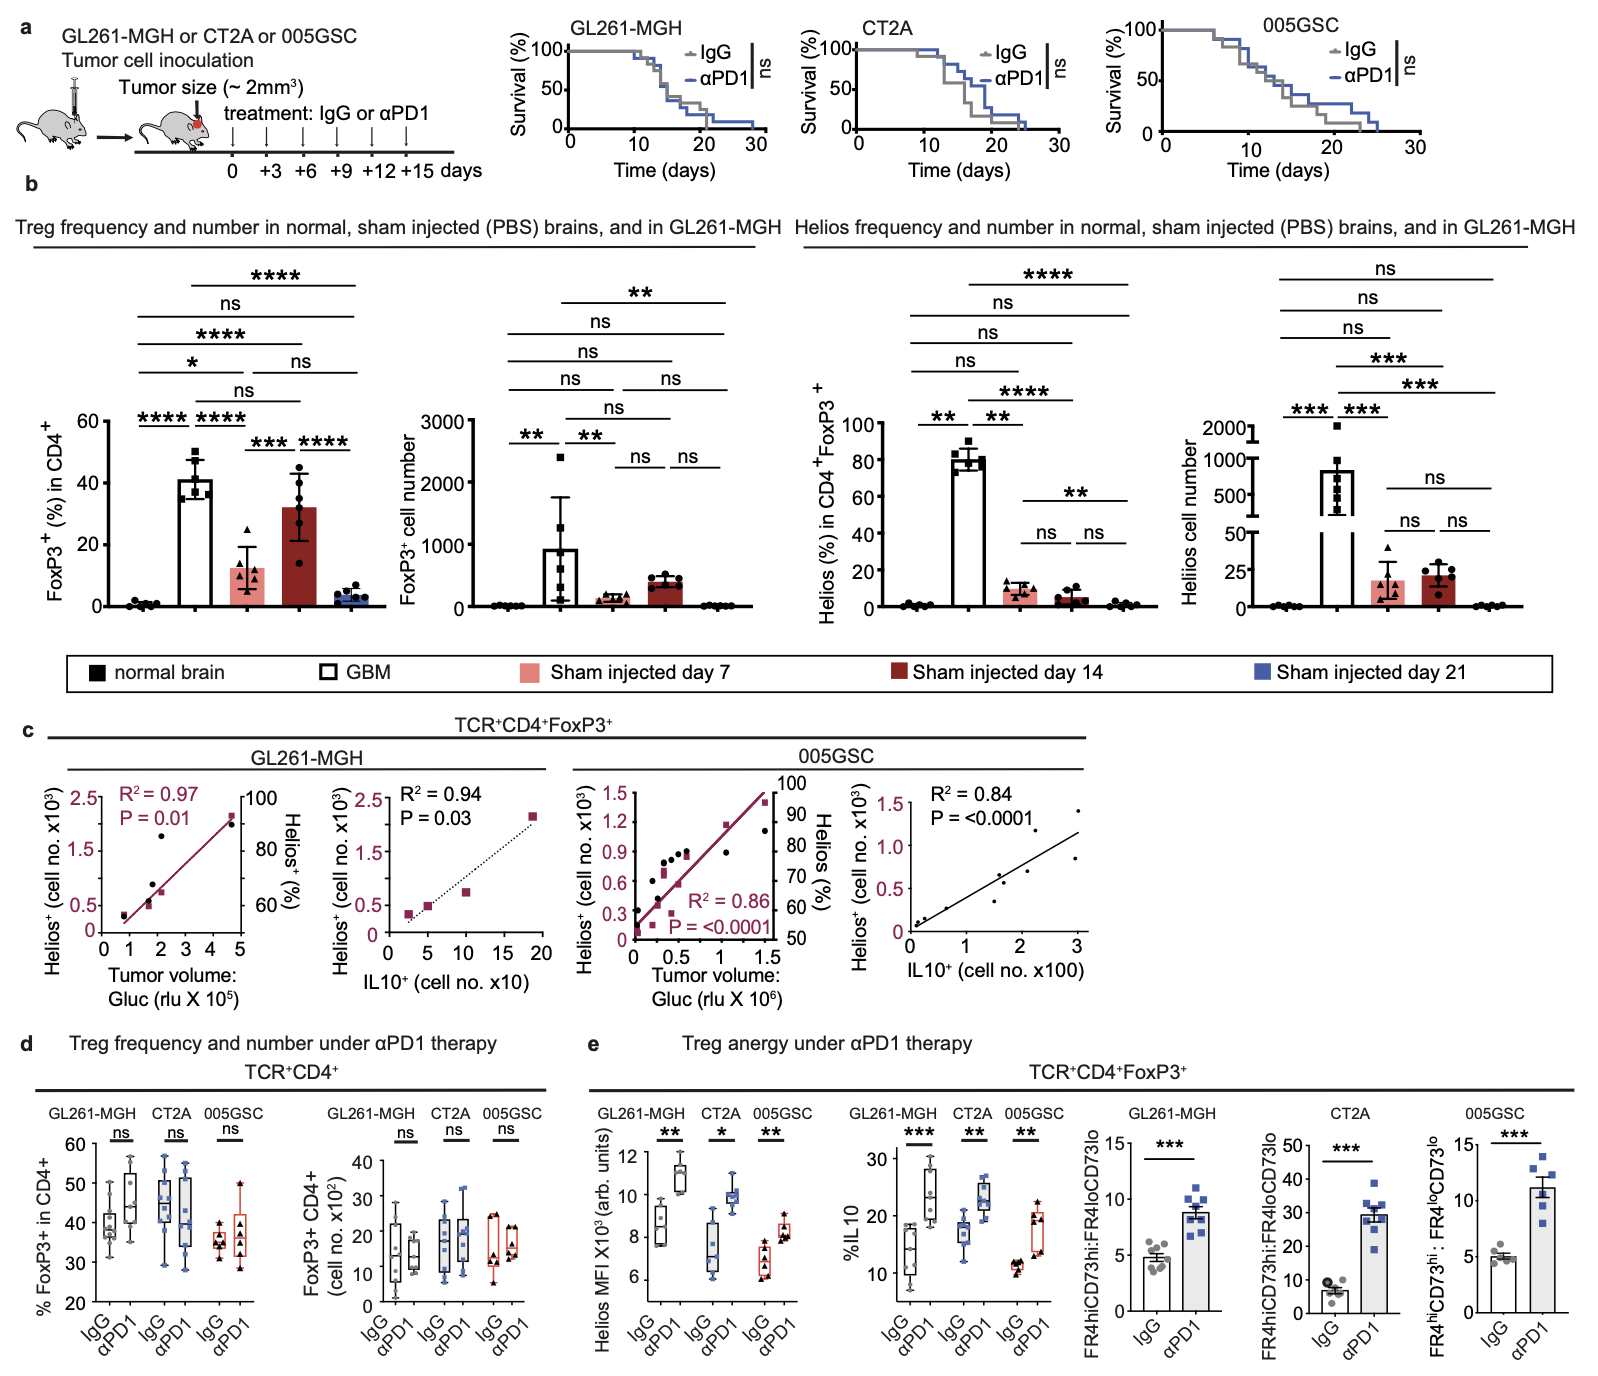 Targeting Treg cells with GITR activation alleviates resistance to immunotherapy in murine glioblastomas